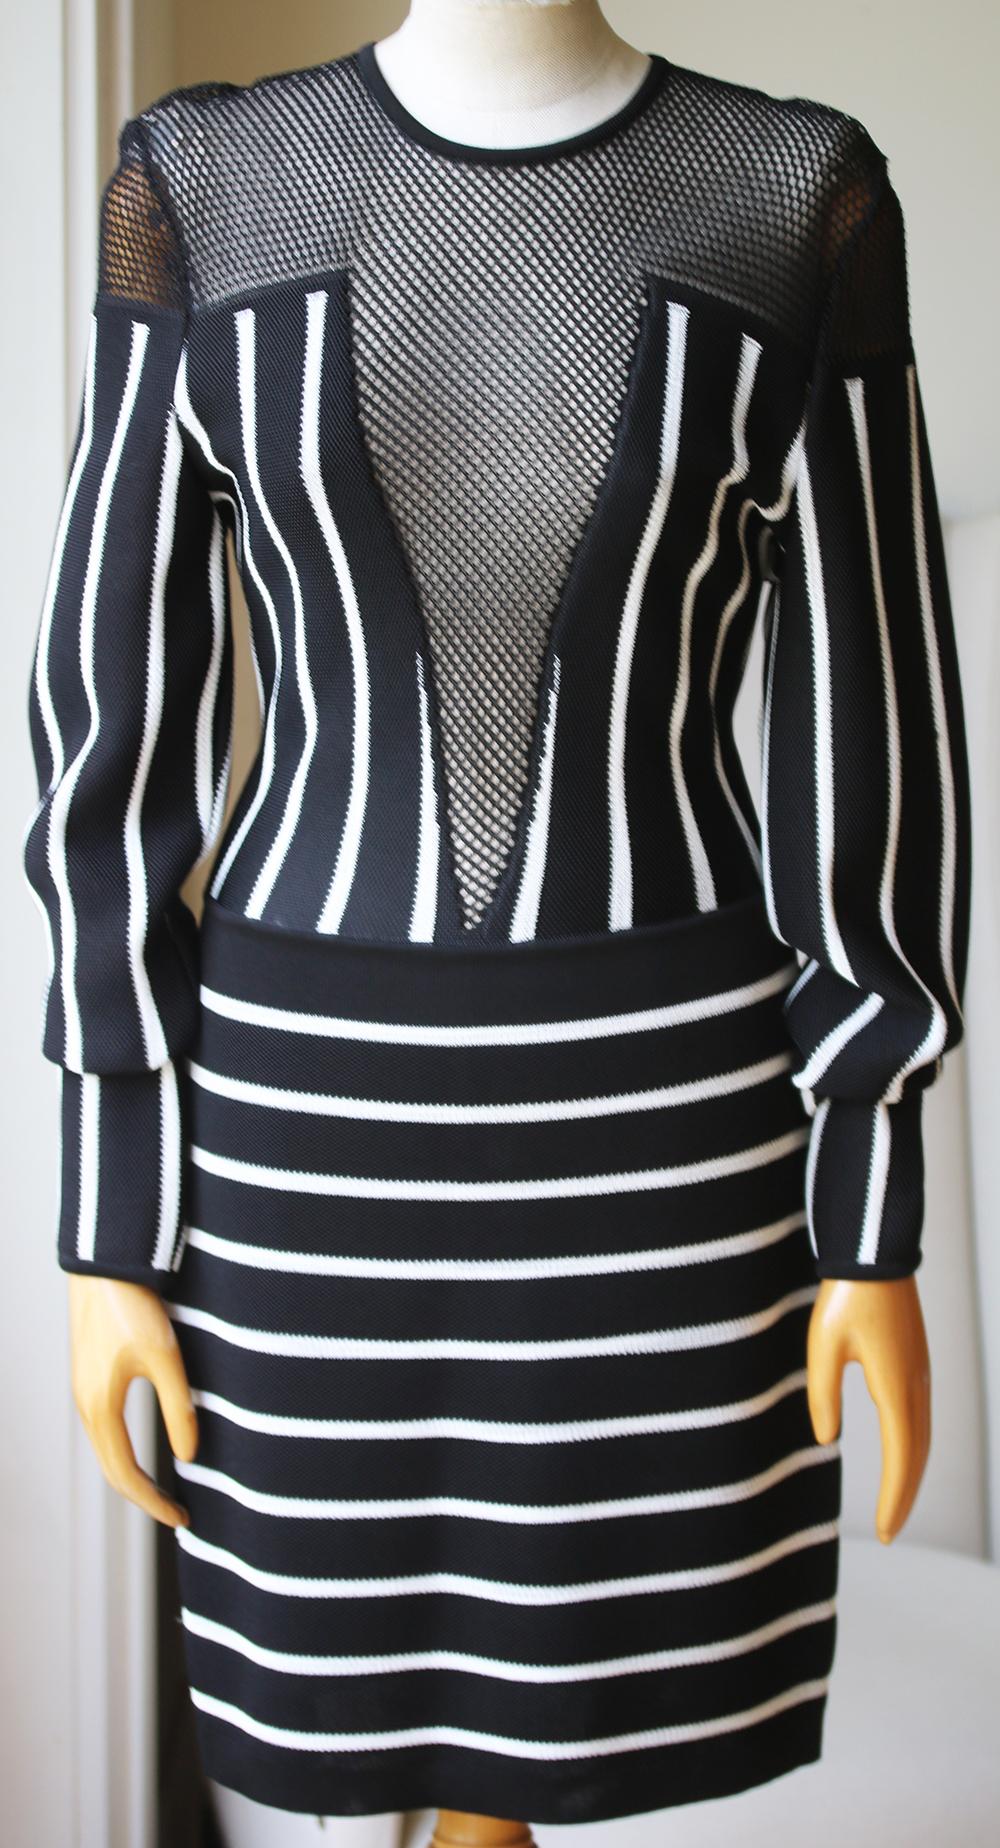 Black and white striped dress from Balmain. Silver-tone zip fastening at back. Mesh inserts at bodice. Elasticated round neck. 95% Polyester, 5% viscose.

Size: FR 40 (UK 12, US 8, IT 44)

Condition: As new condition, no sign of wear. 